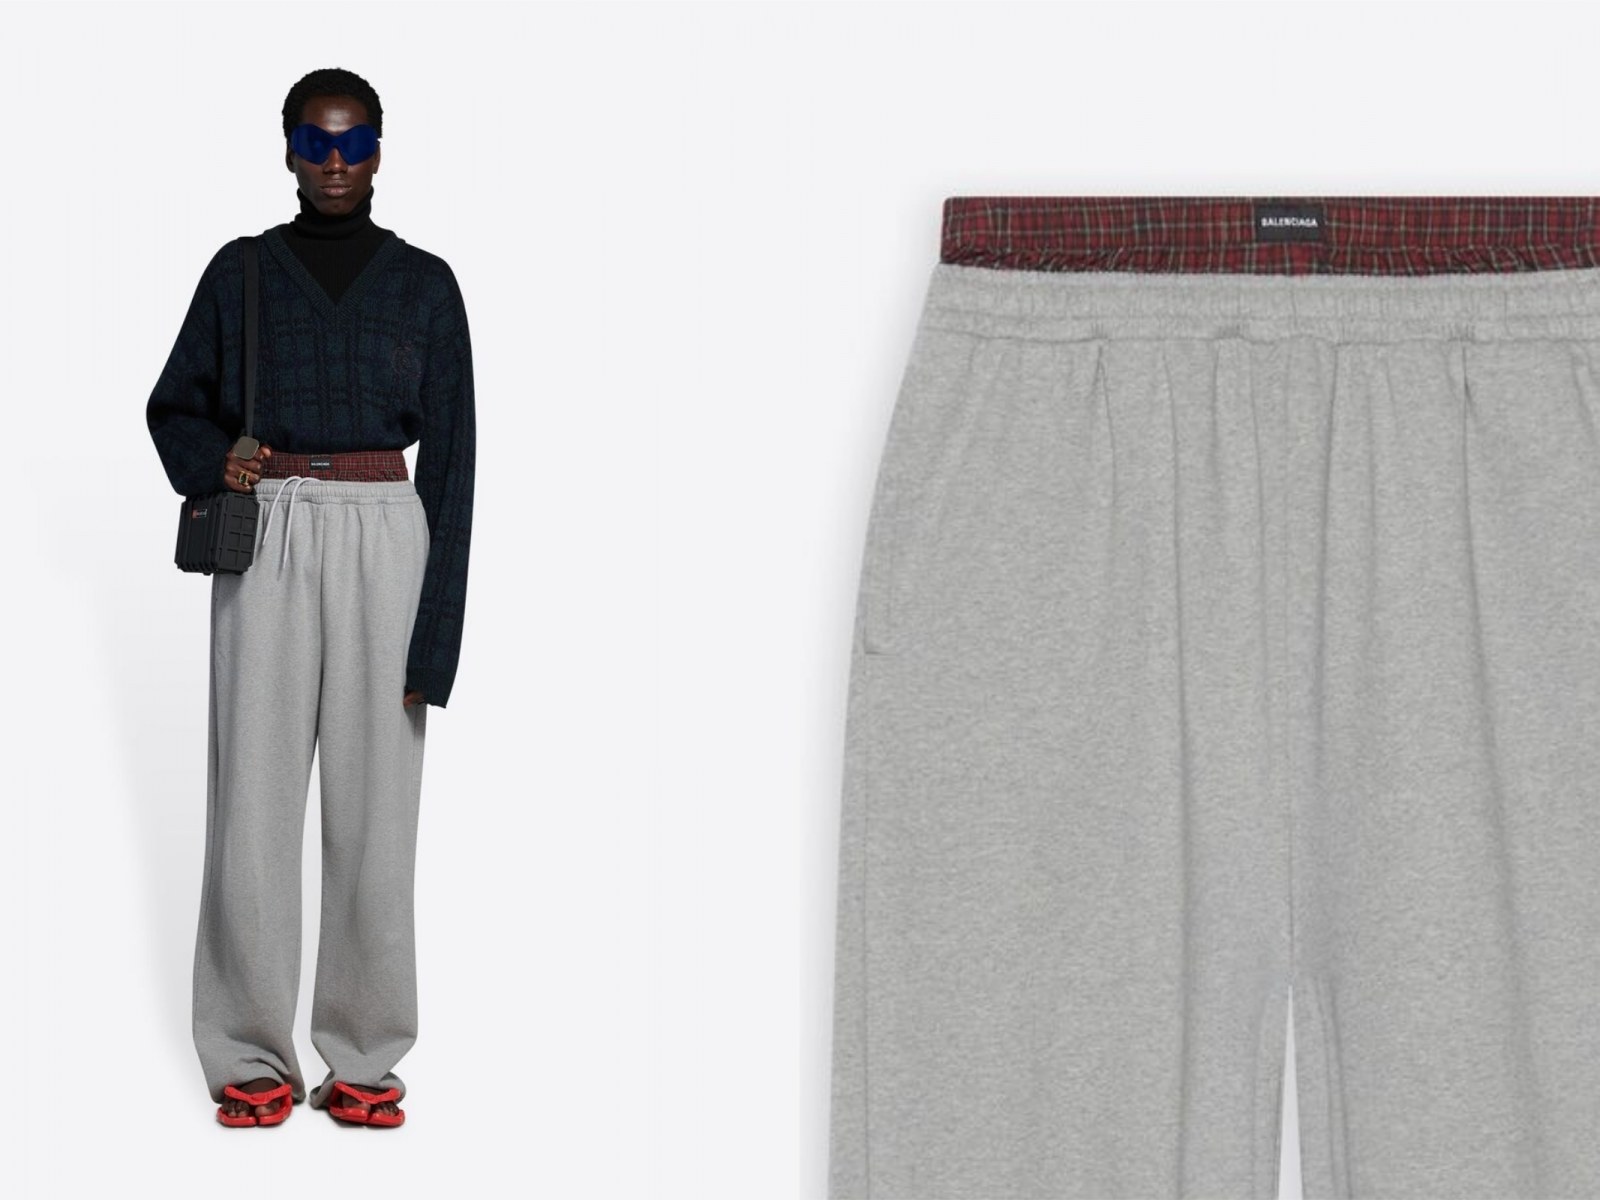 Balenciaga's $1.2K 'sagging' sweatpants get called out for appropriation